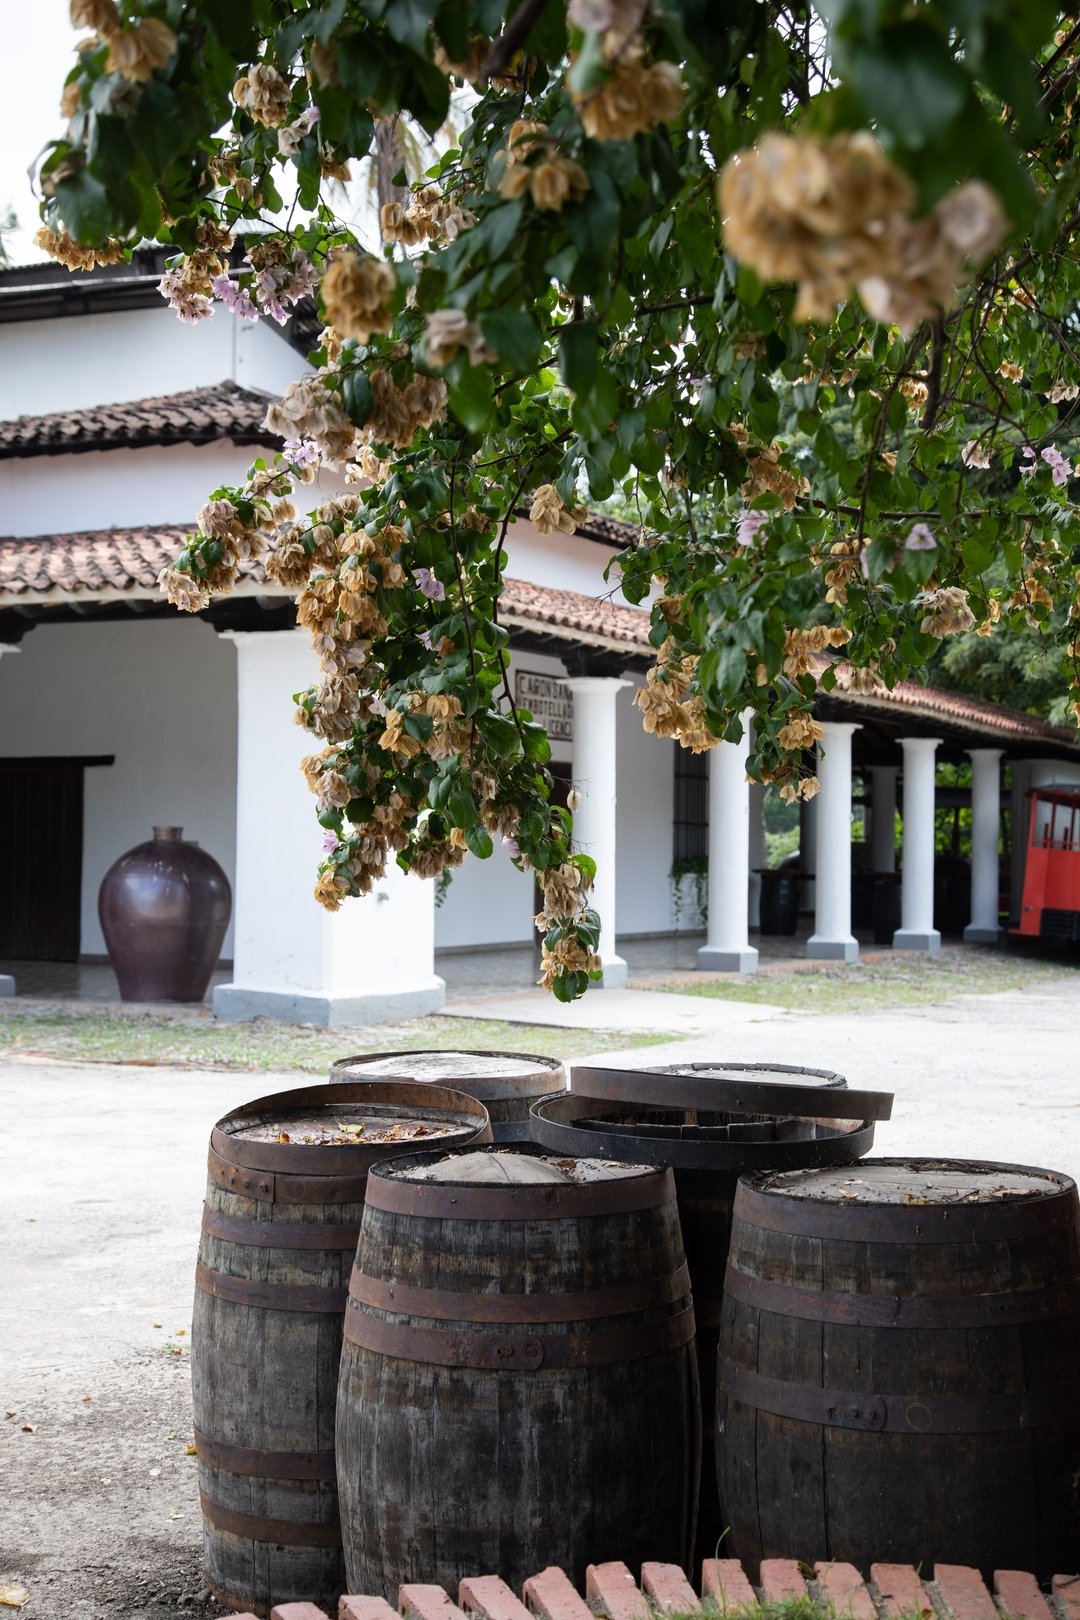 Built on over 200 Years of Family Tradition | Santa Teresa Rum Farm in Venezuela. 

Founded in 1796 and located in the mountainous Aragua Valley, ours is more than a home. It has withstood wars, revolutions, and invasions. There has always been sugar